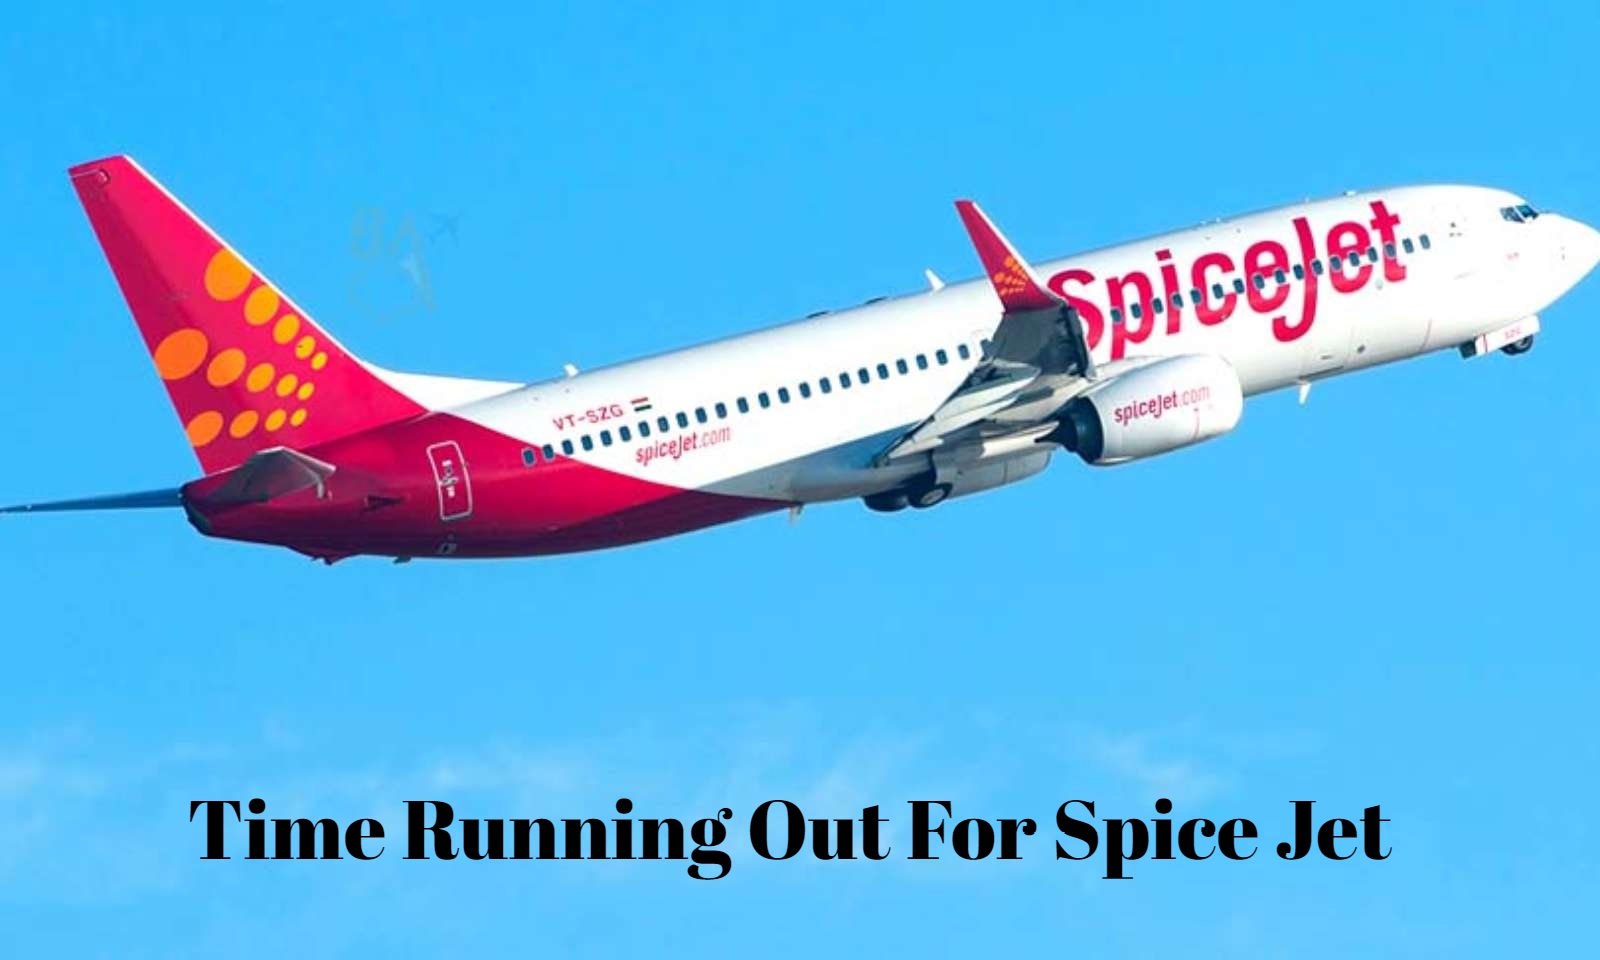 Is Spice Jet At The End Of Its Tether?